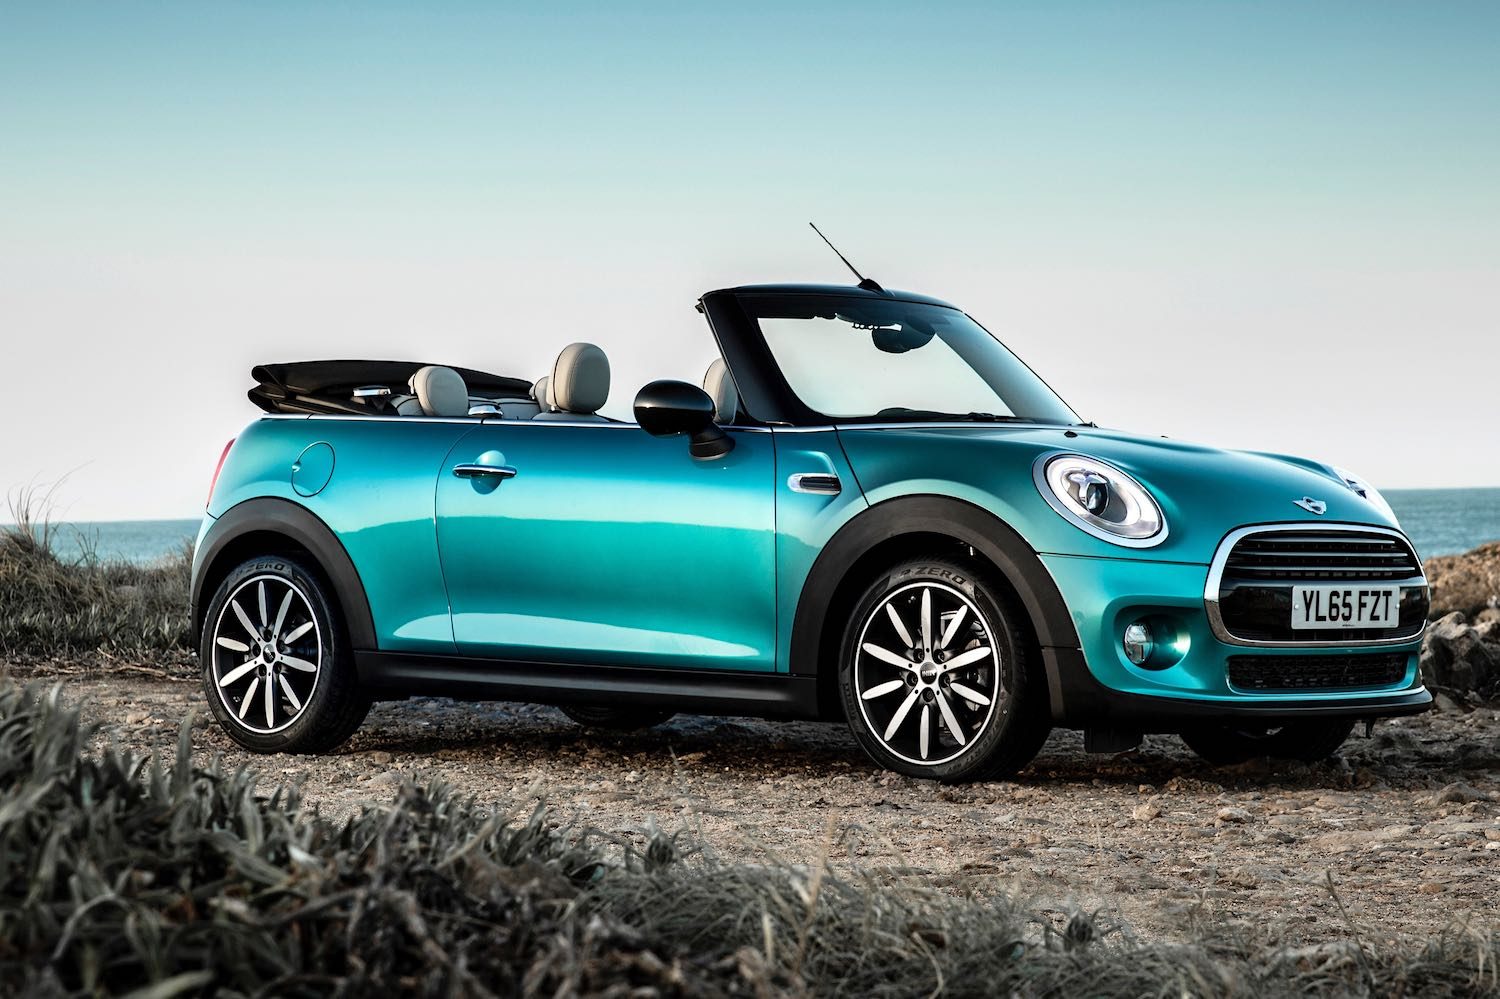 Drive.co.uk | The Bestselling Mini Cooper Convertible | Reviewed